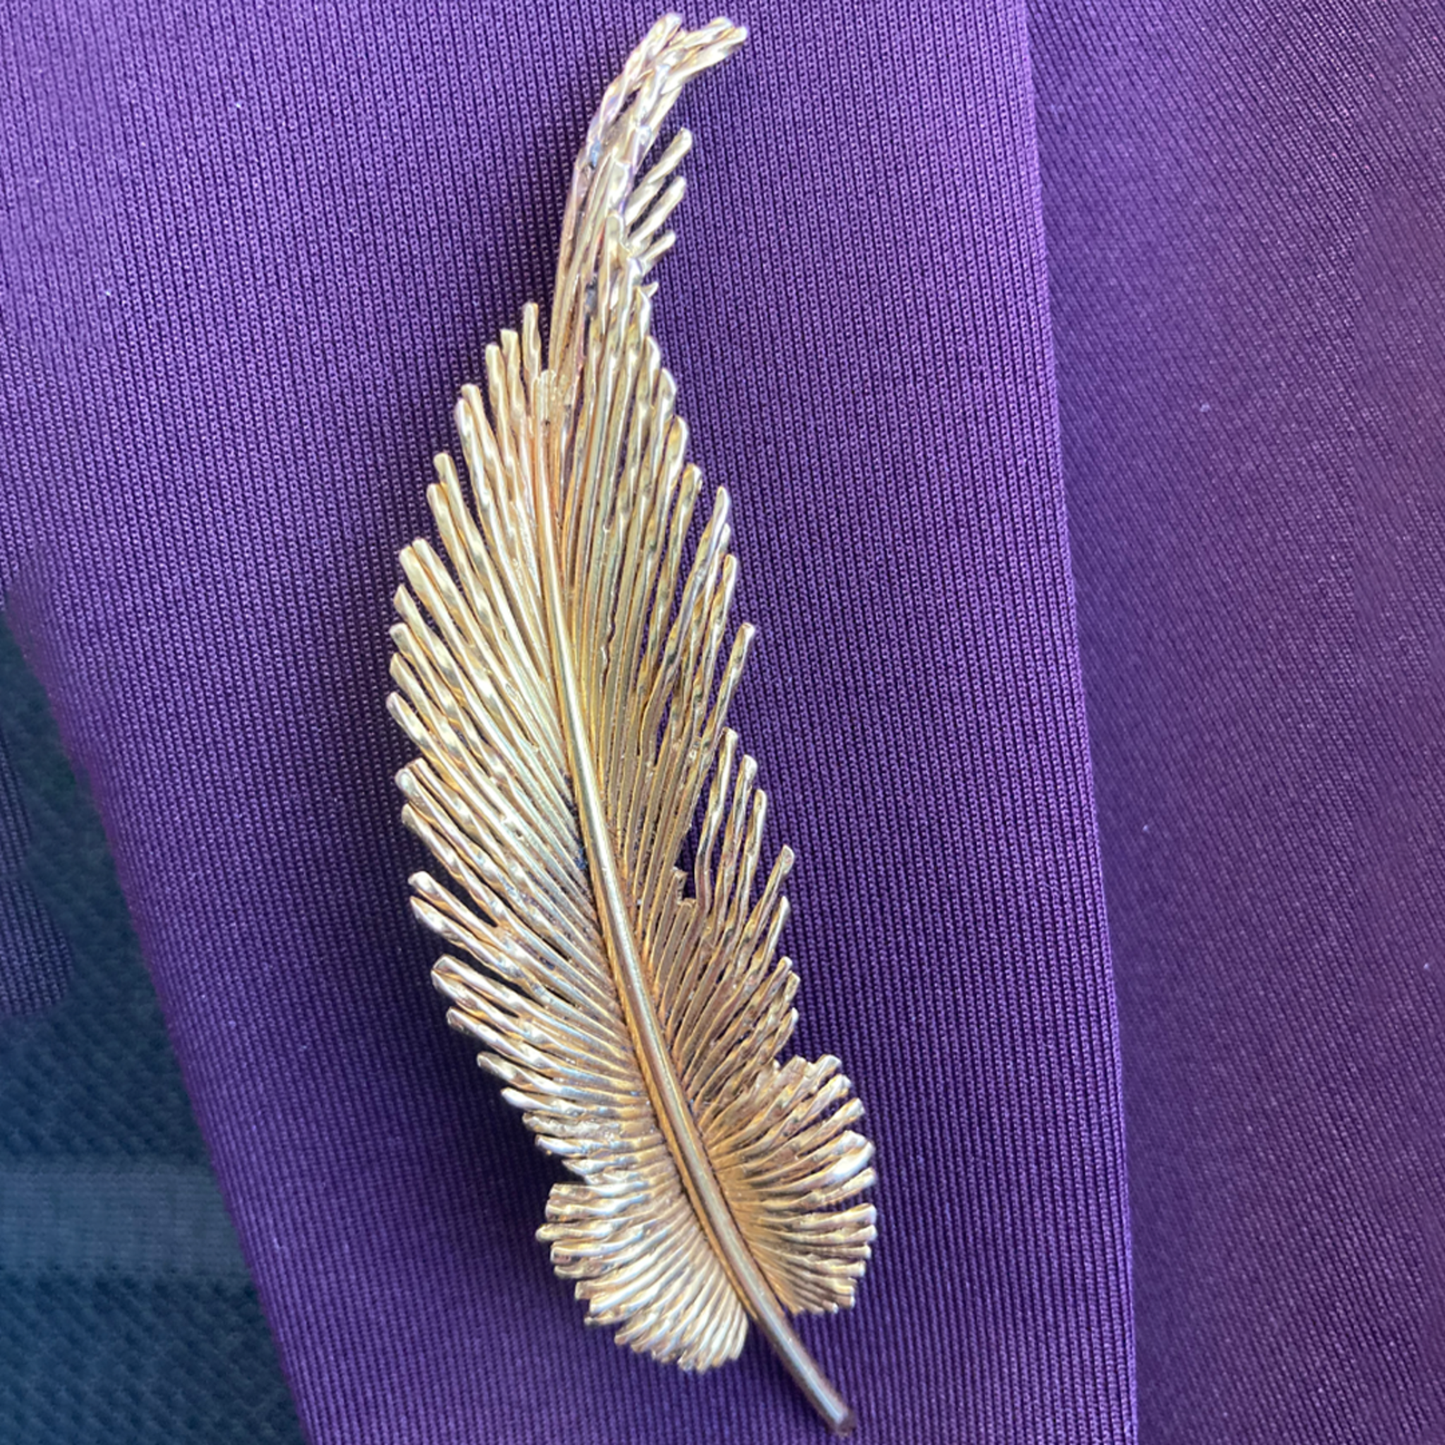 Pierre Sterle 1970s 18KT Yellow Gold Feather Brooch worn on lapel